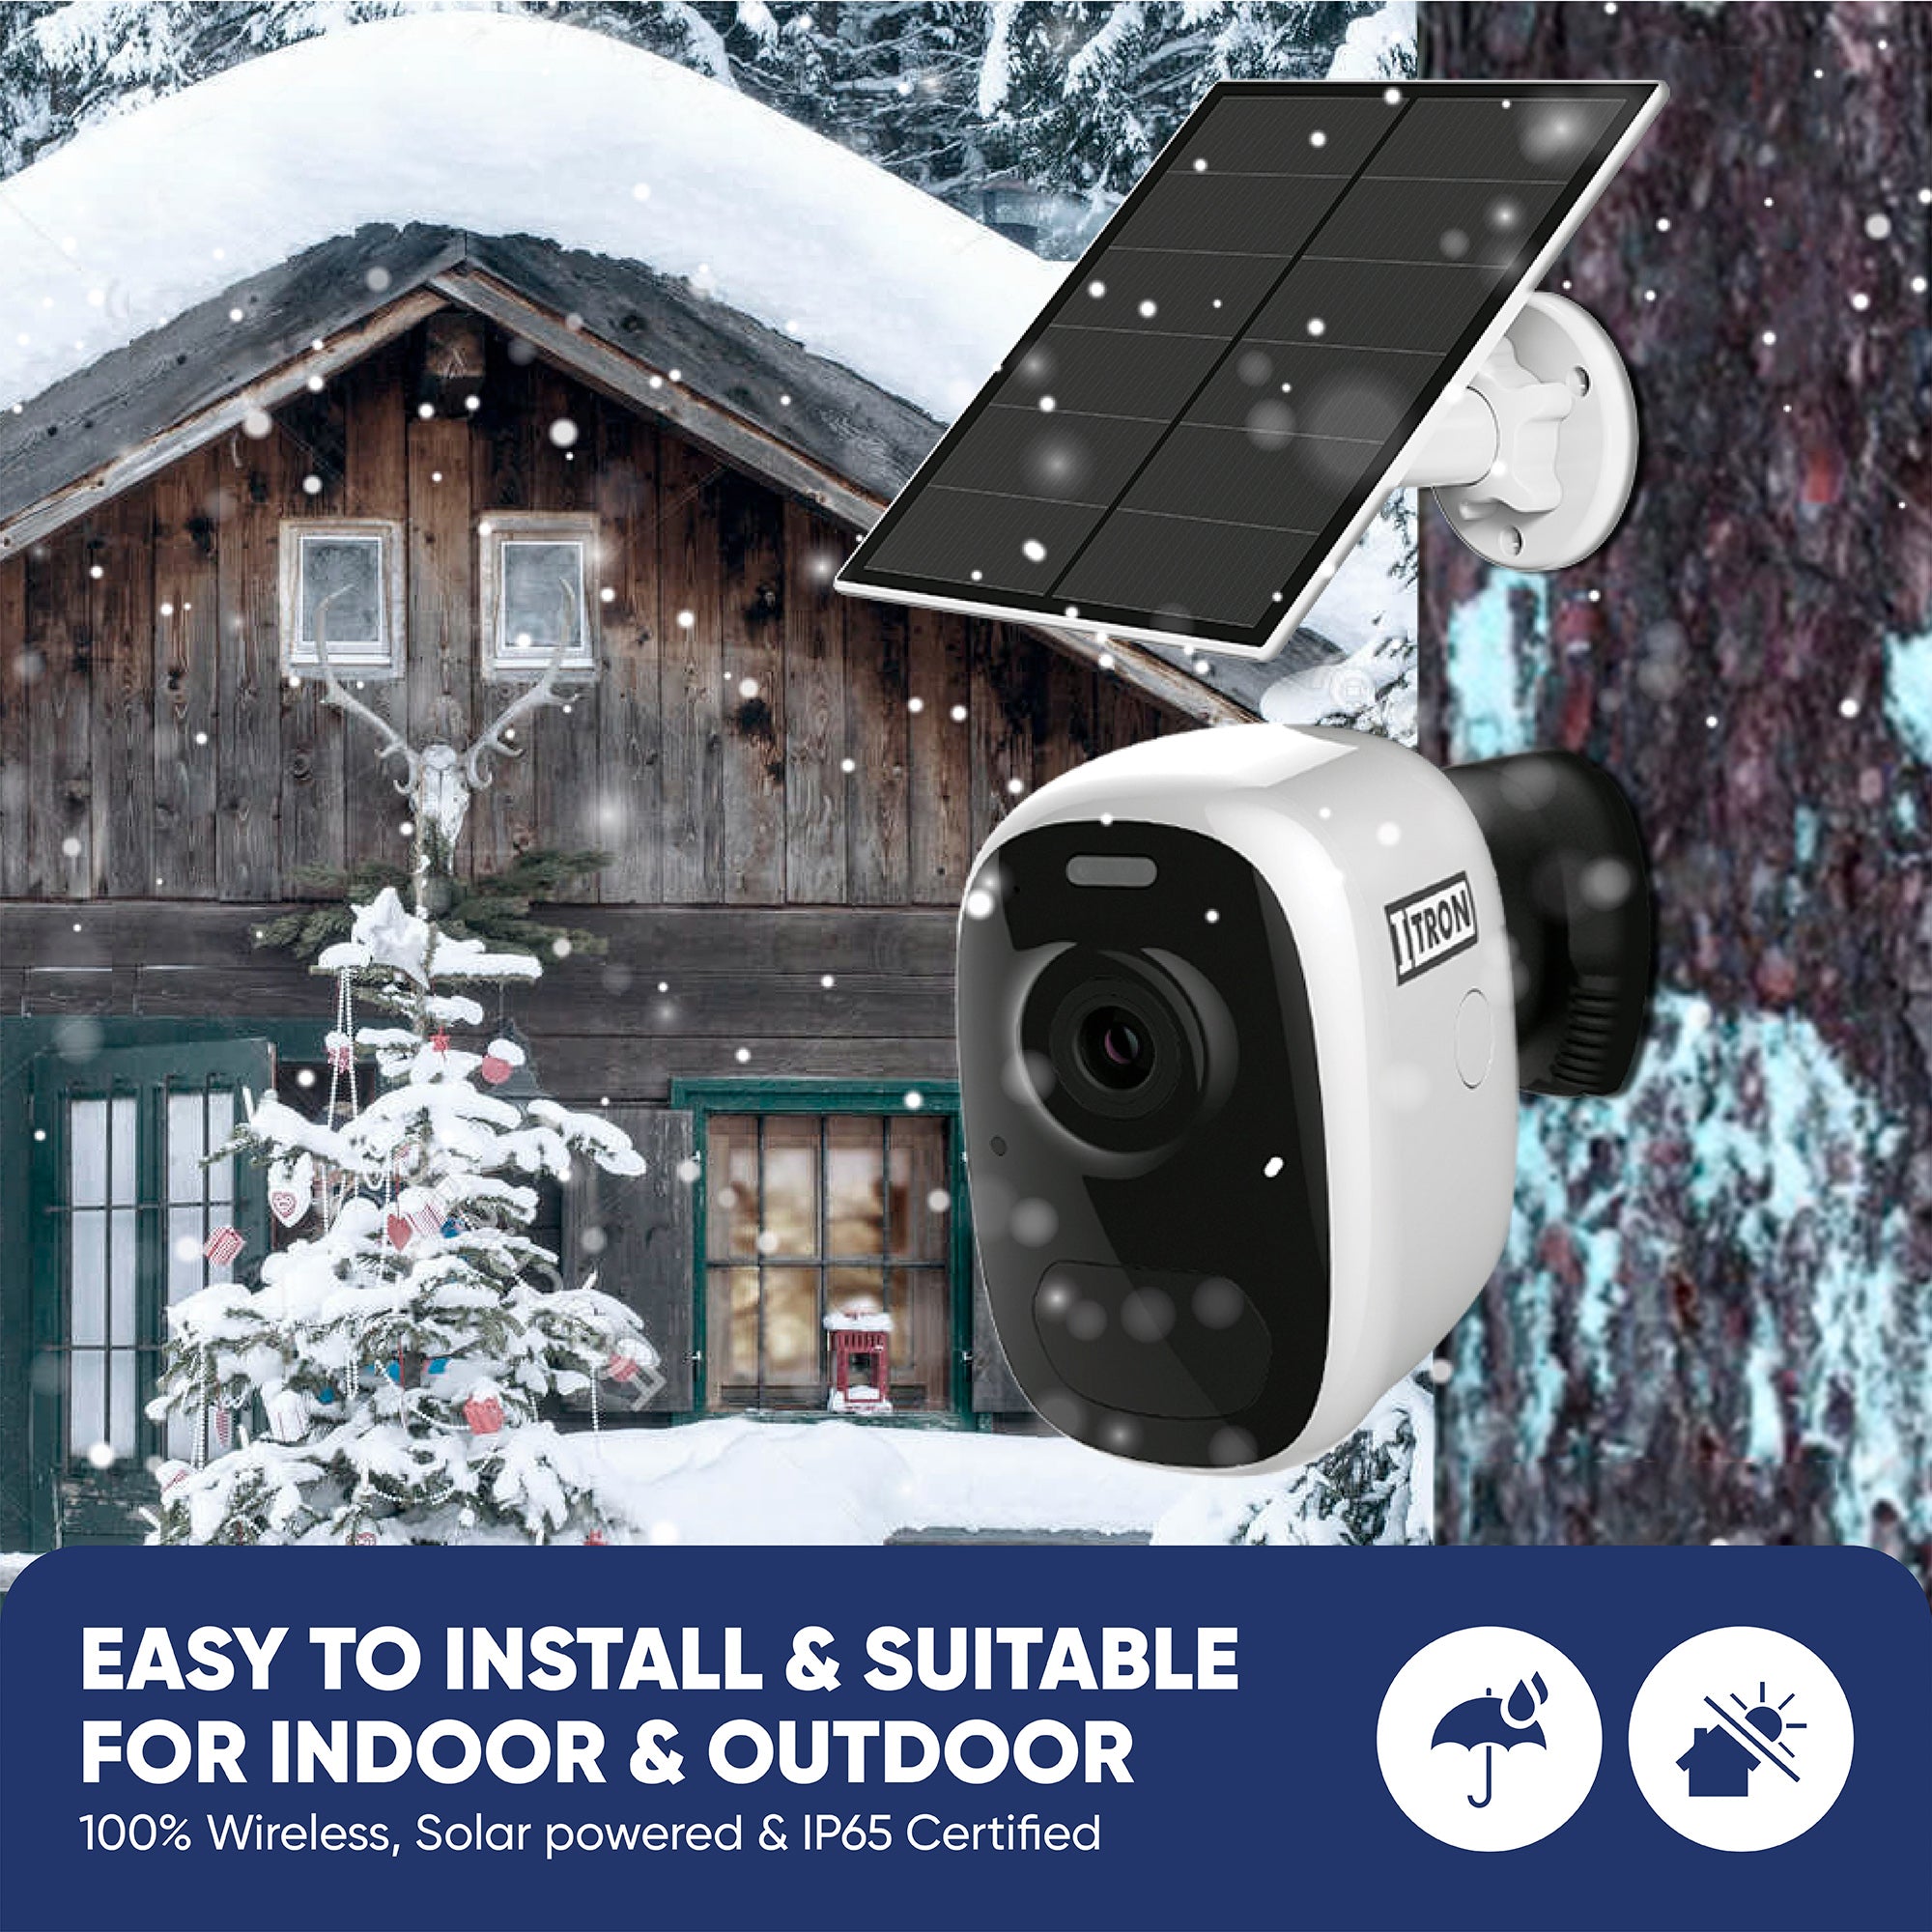 IT-WifiCAM - Camera with Solar Panel +  WiFi 4MP AI Night Vision Security Camera, SD & Cloud Storage